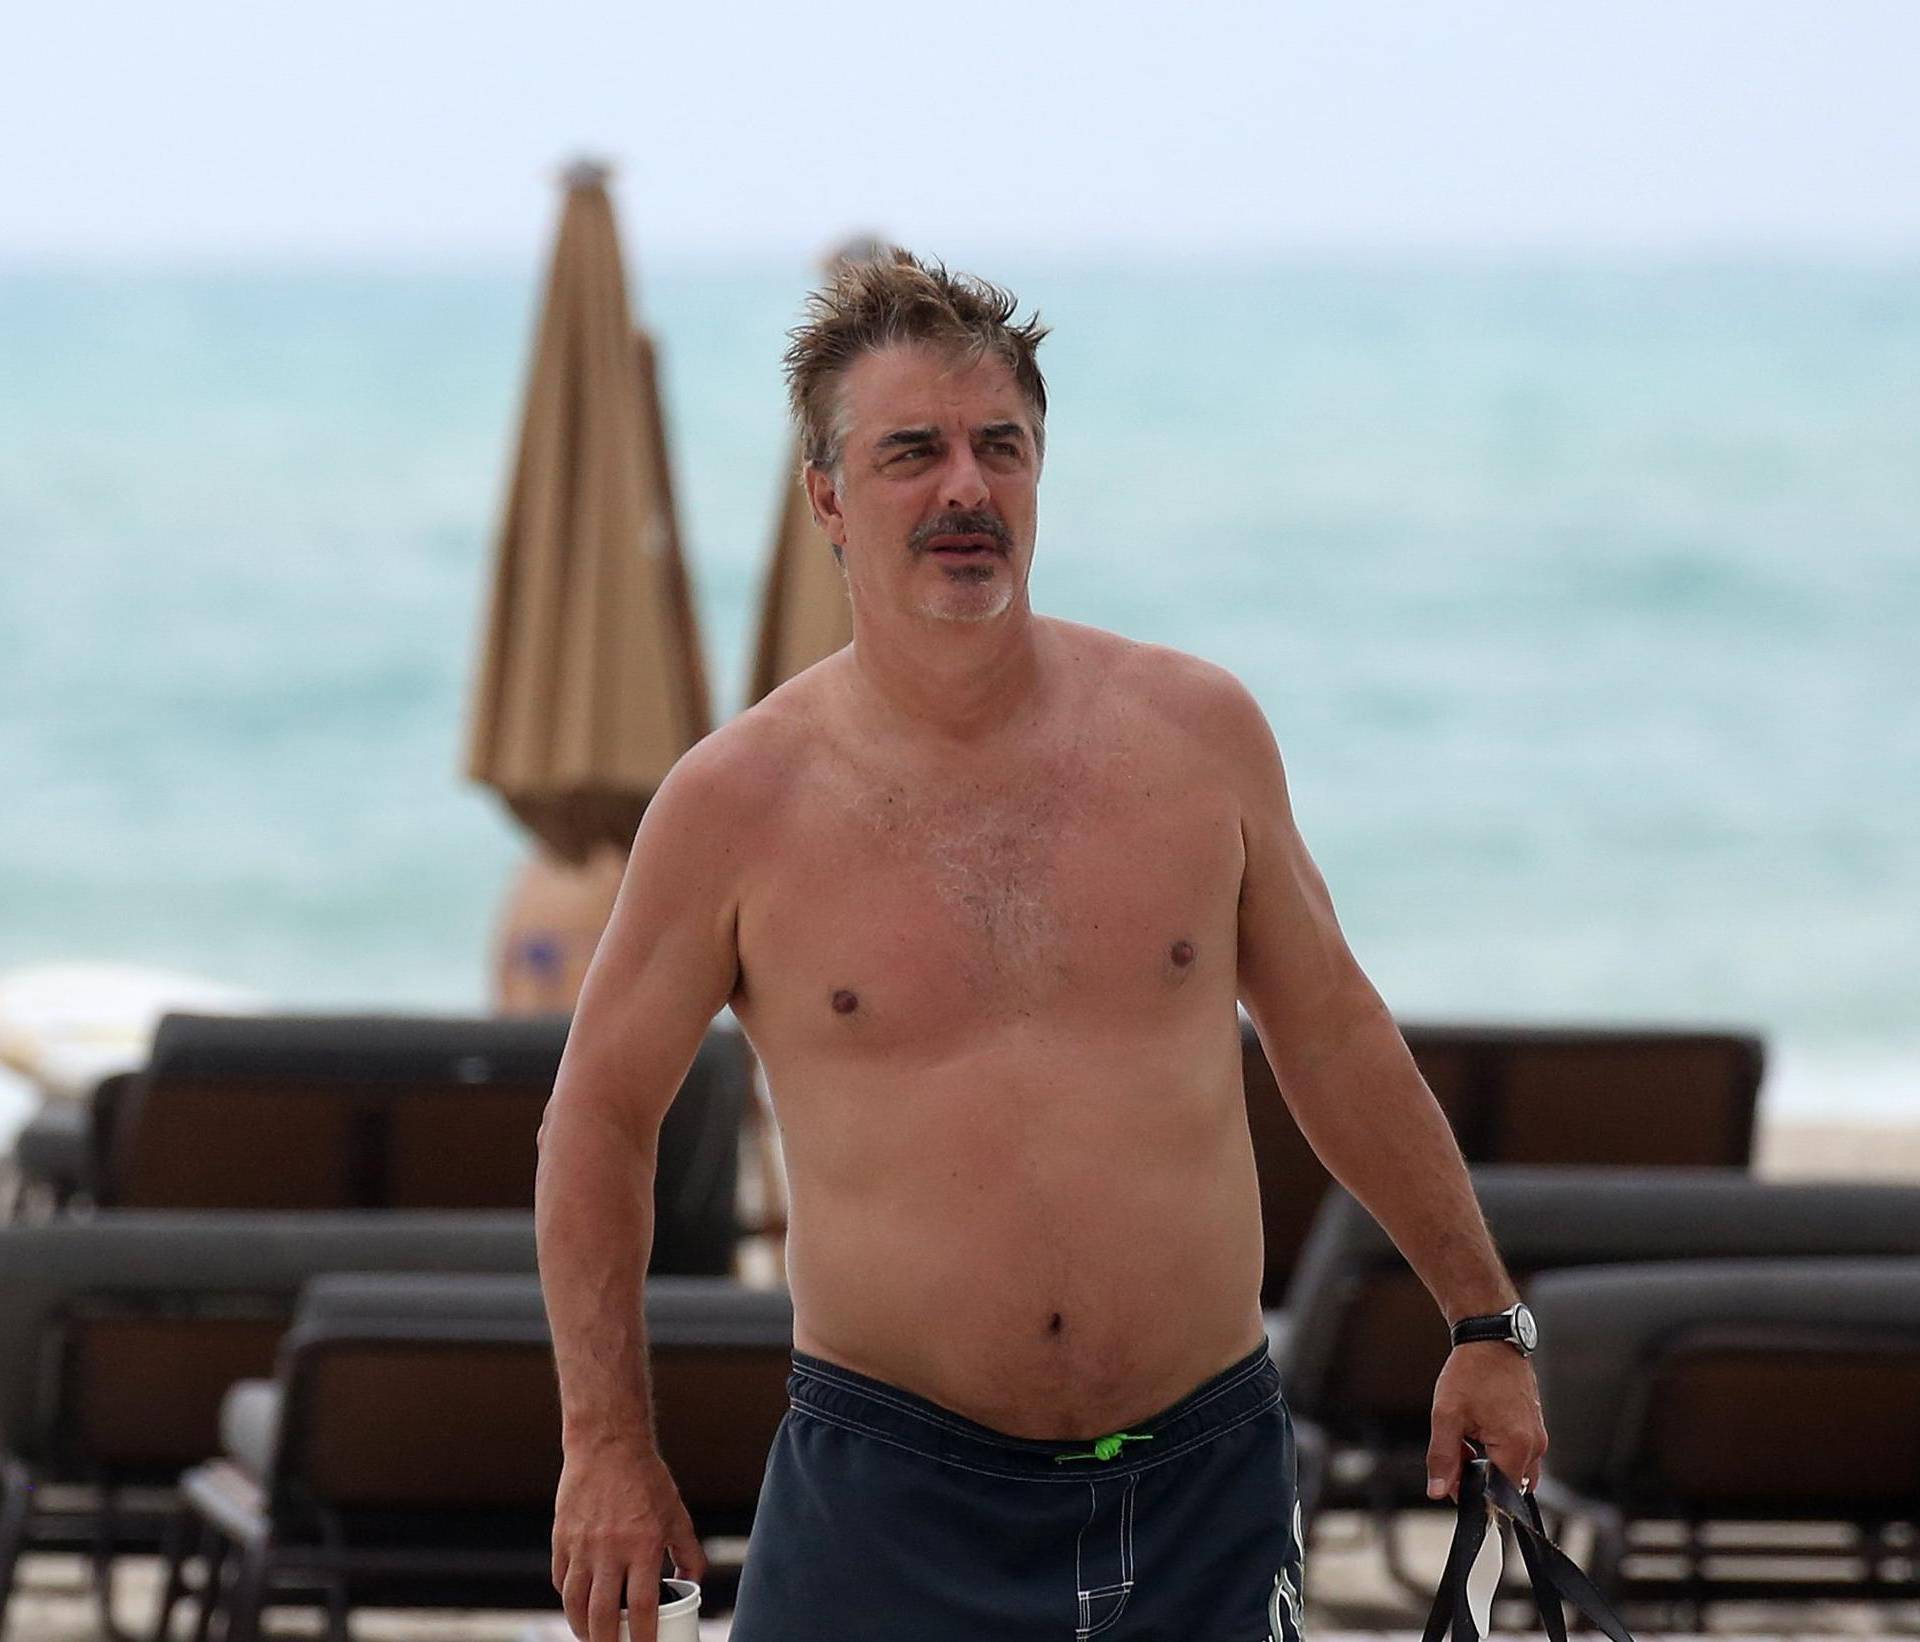 Sex and the City actor Chris Noth  relaxes shirtless on the beach in Miami